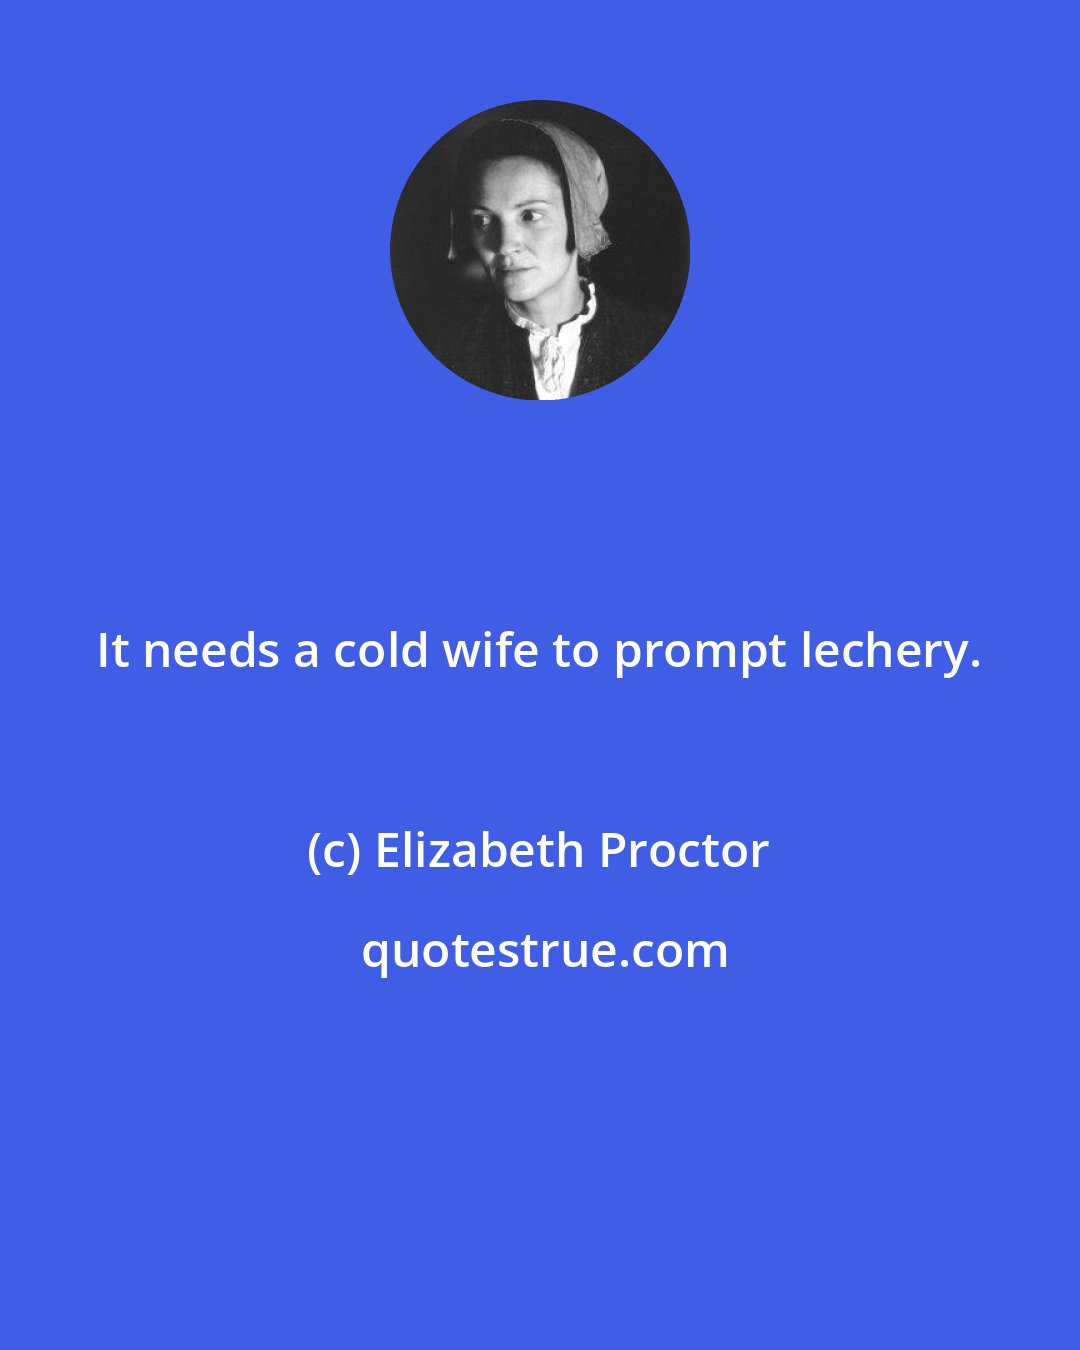 Elizabeth Proctor: It needs a cold wife to prompt lechery.